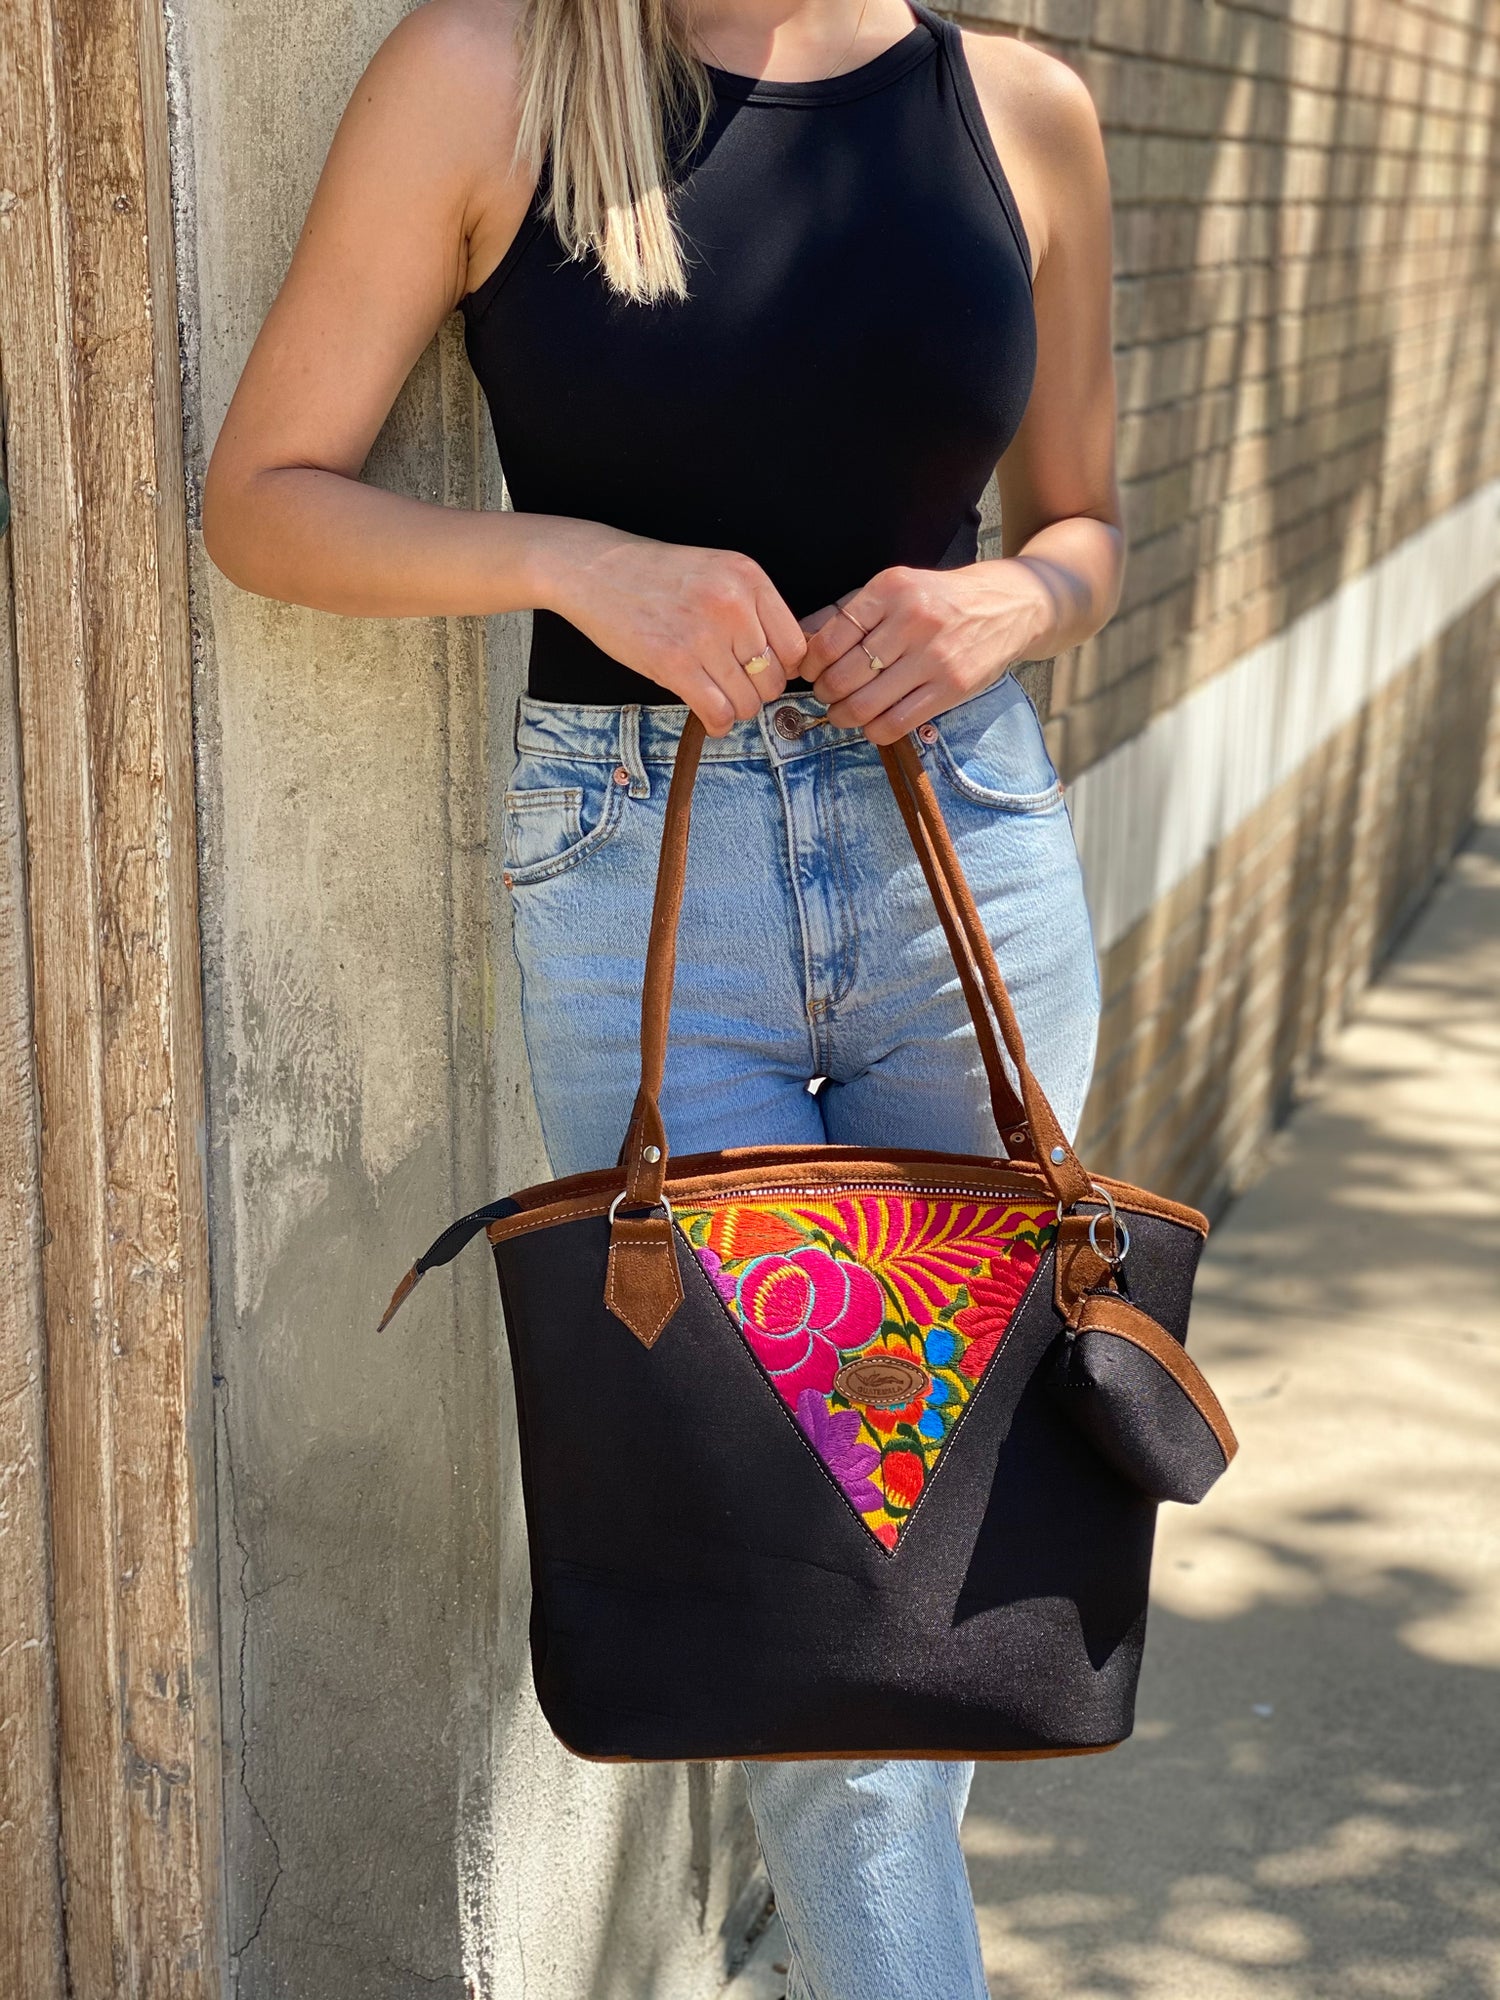 Black embroidery tote bag with floral detail. Handmade in Guatemala with Handwoven intricate fabric. The perfect laptop or beach bag. 